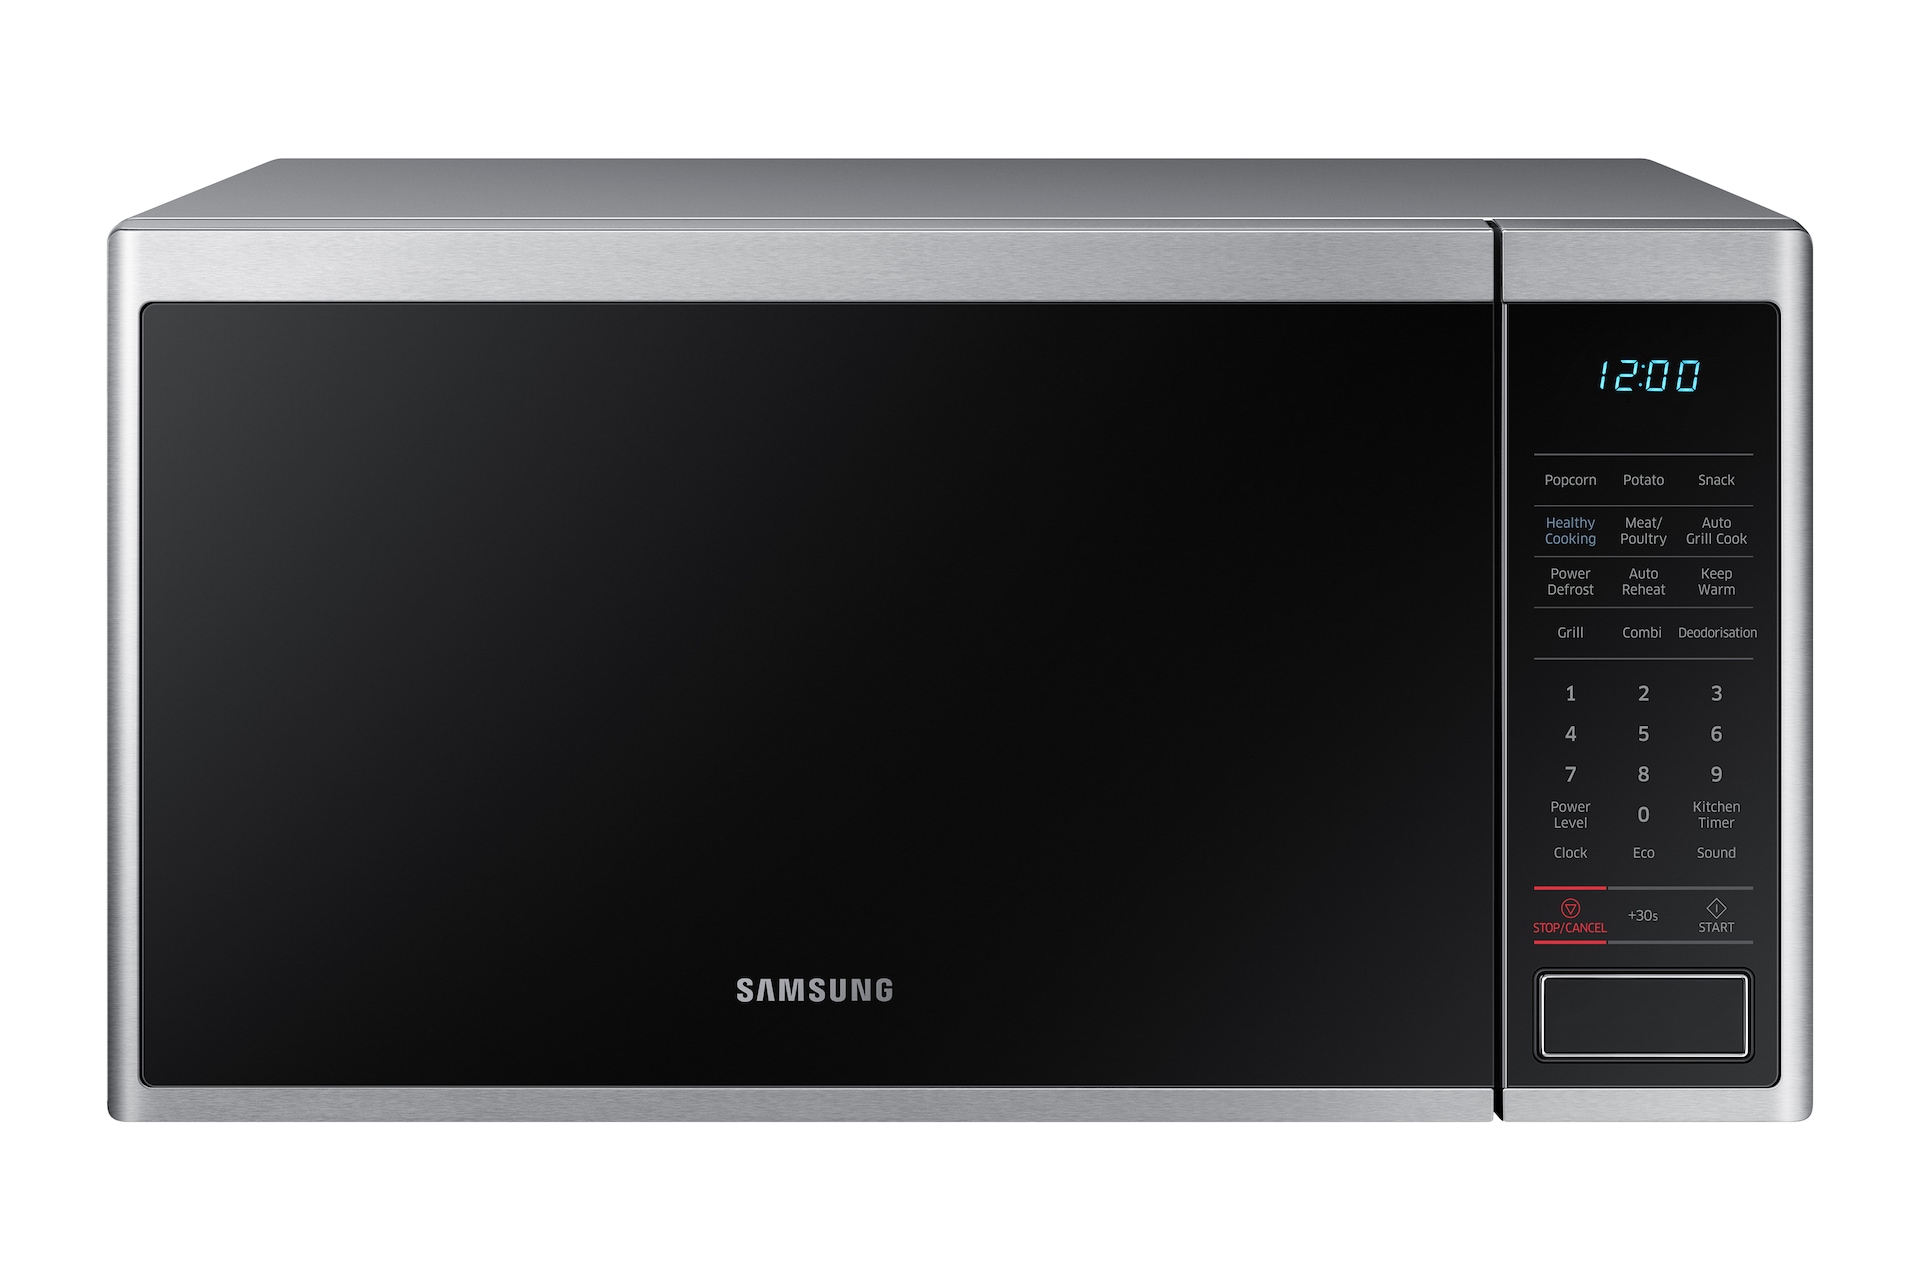 https://images.samsung.com/is/image/samsung/mx-microwave-oven-grill-mg40j5133at-mg40j5133at-ax-STSS-61708764?scl=1&fmt=png-alpha